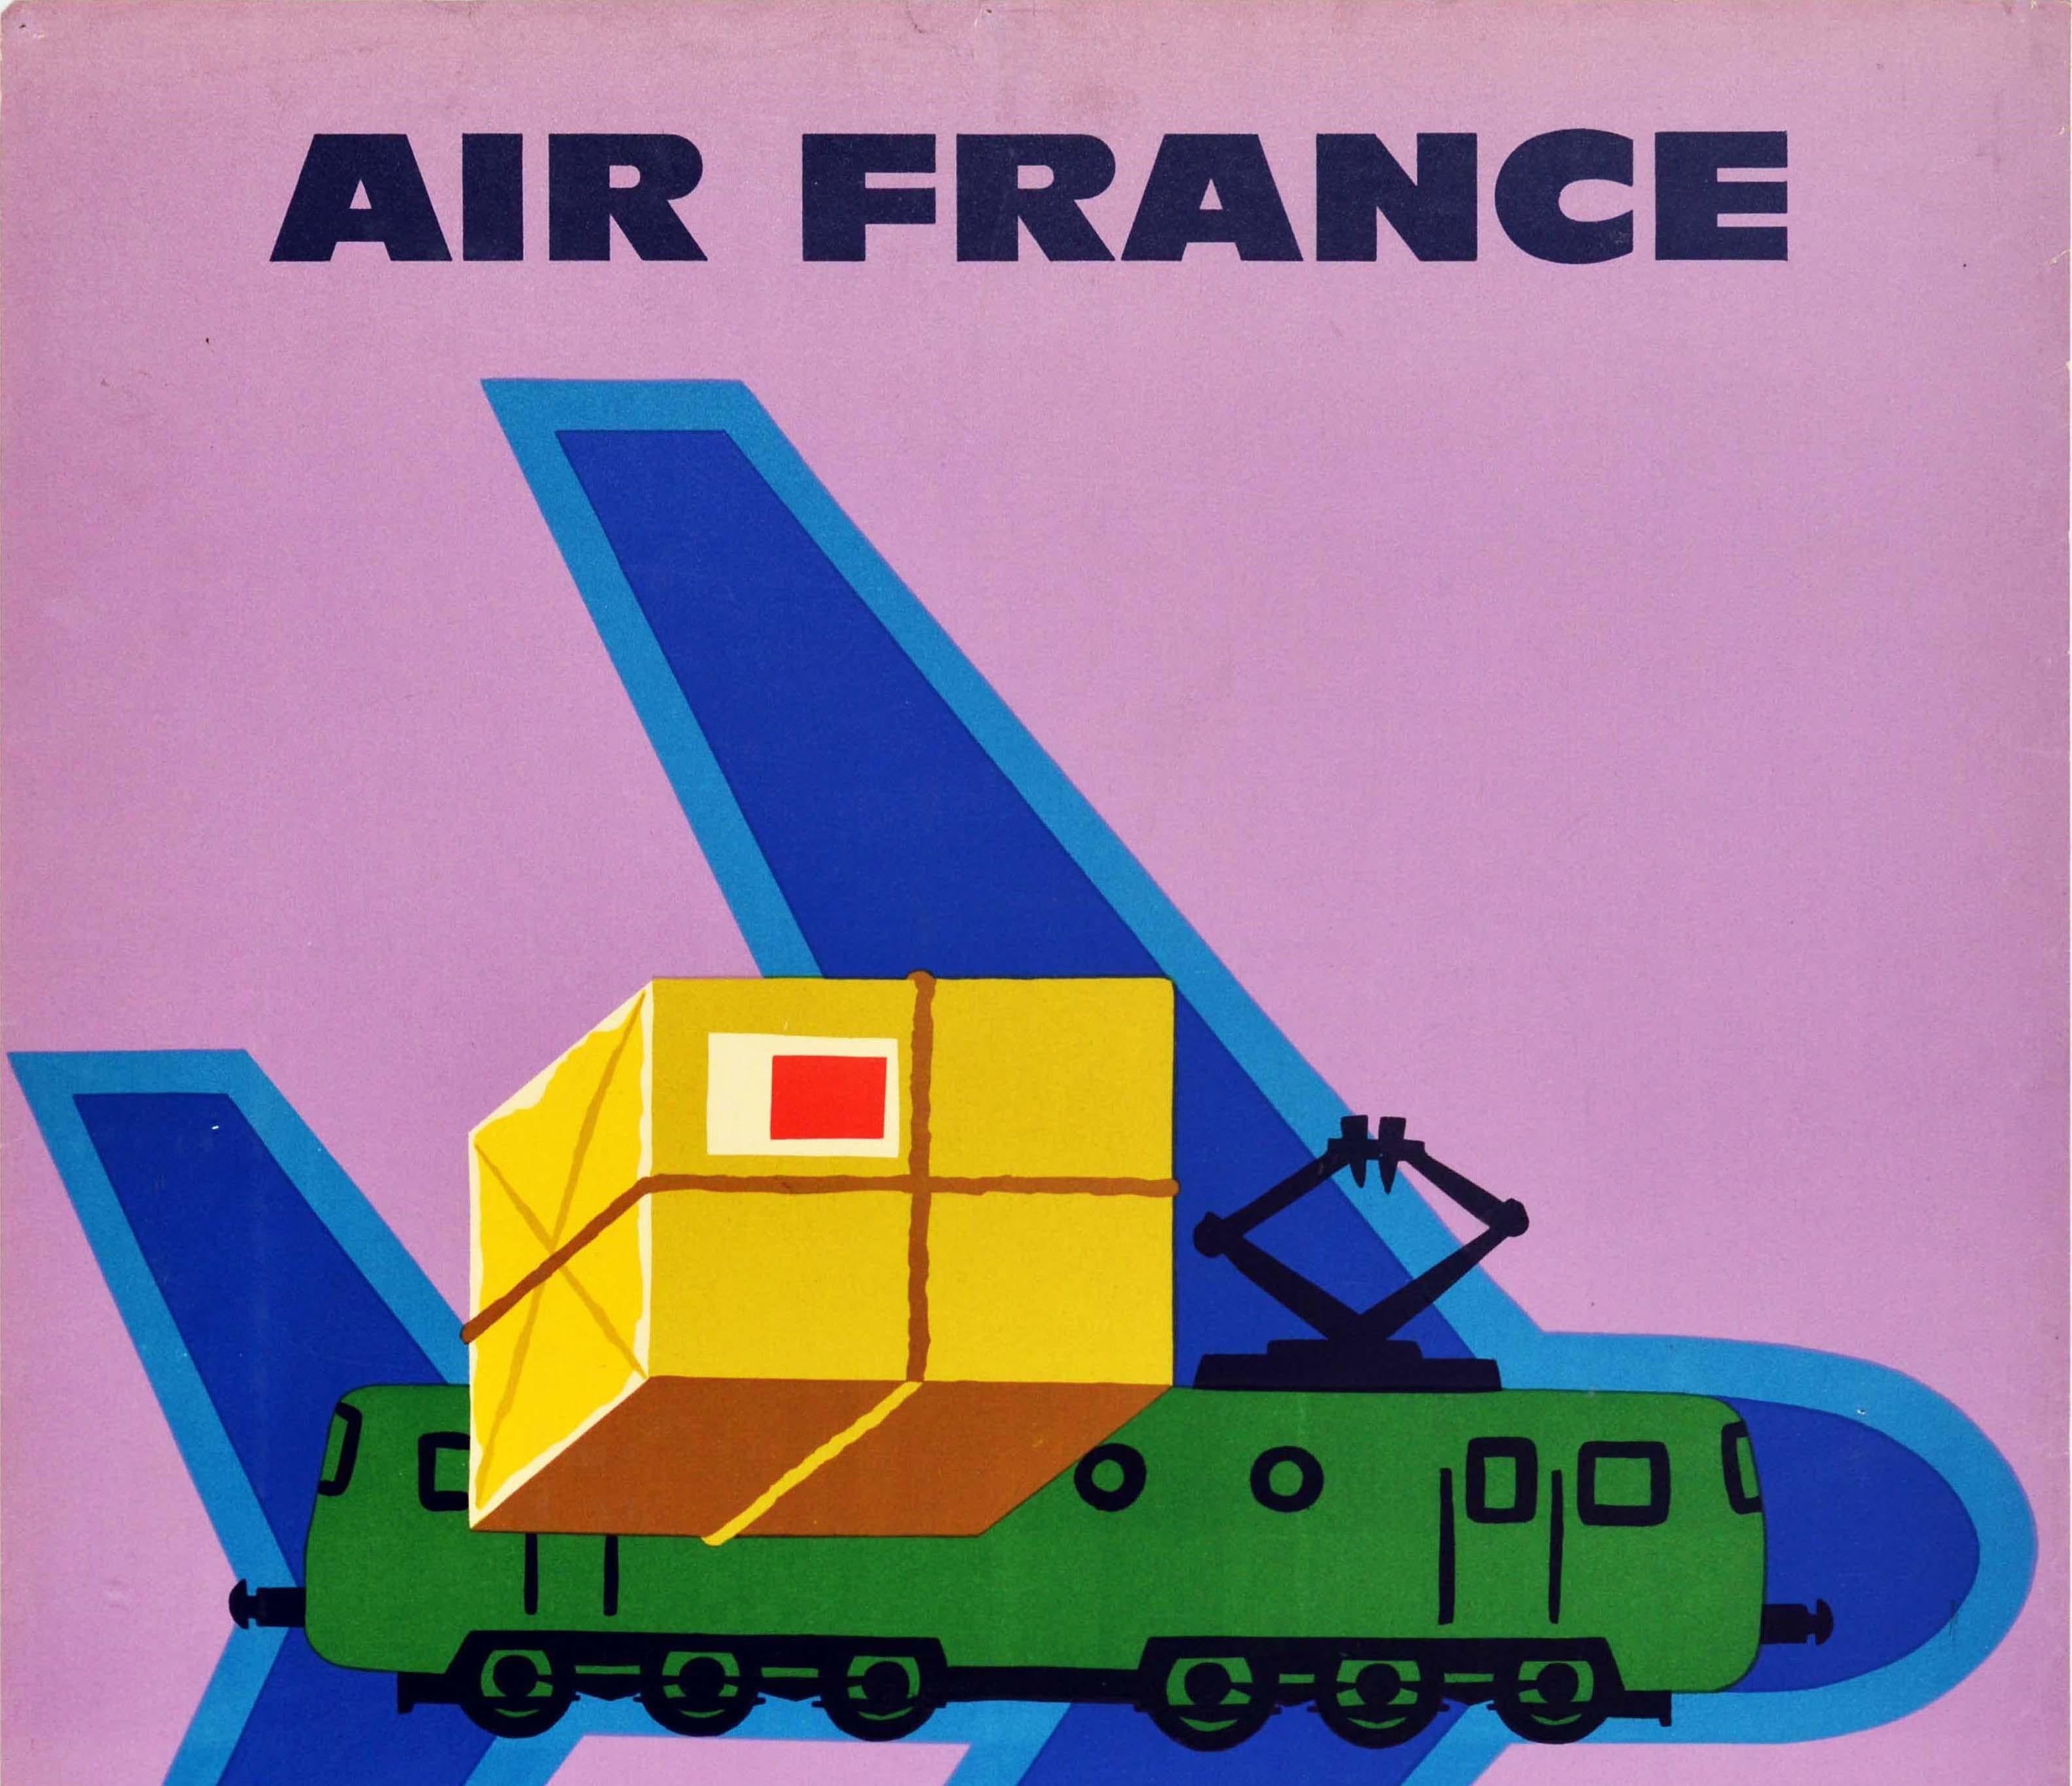 Original vintage advertising poster for Air France to promote their air mail post service - Air France colis postal avion aussi vite qu’une lettre par avion / Air France airmail parcels just as fast as a letter by plane - featuring a bold and